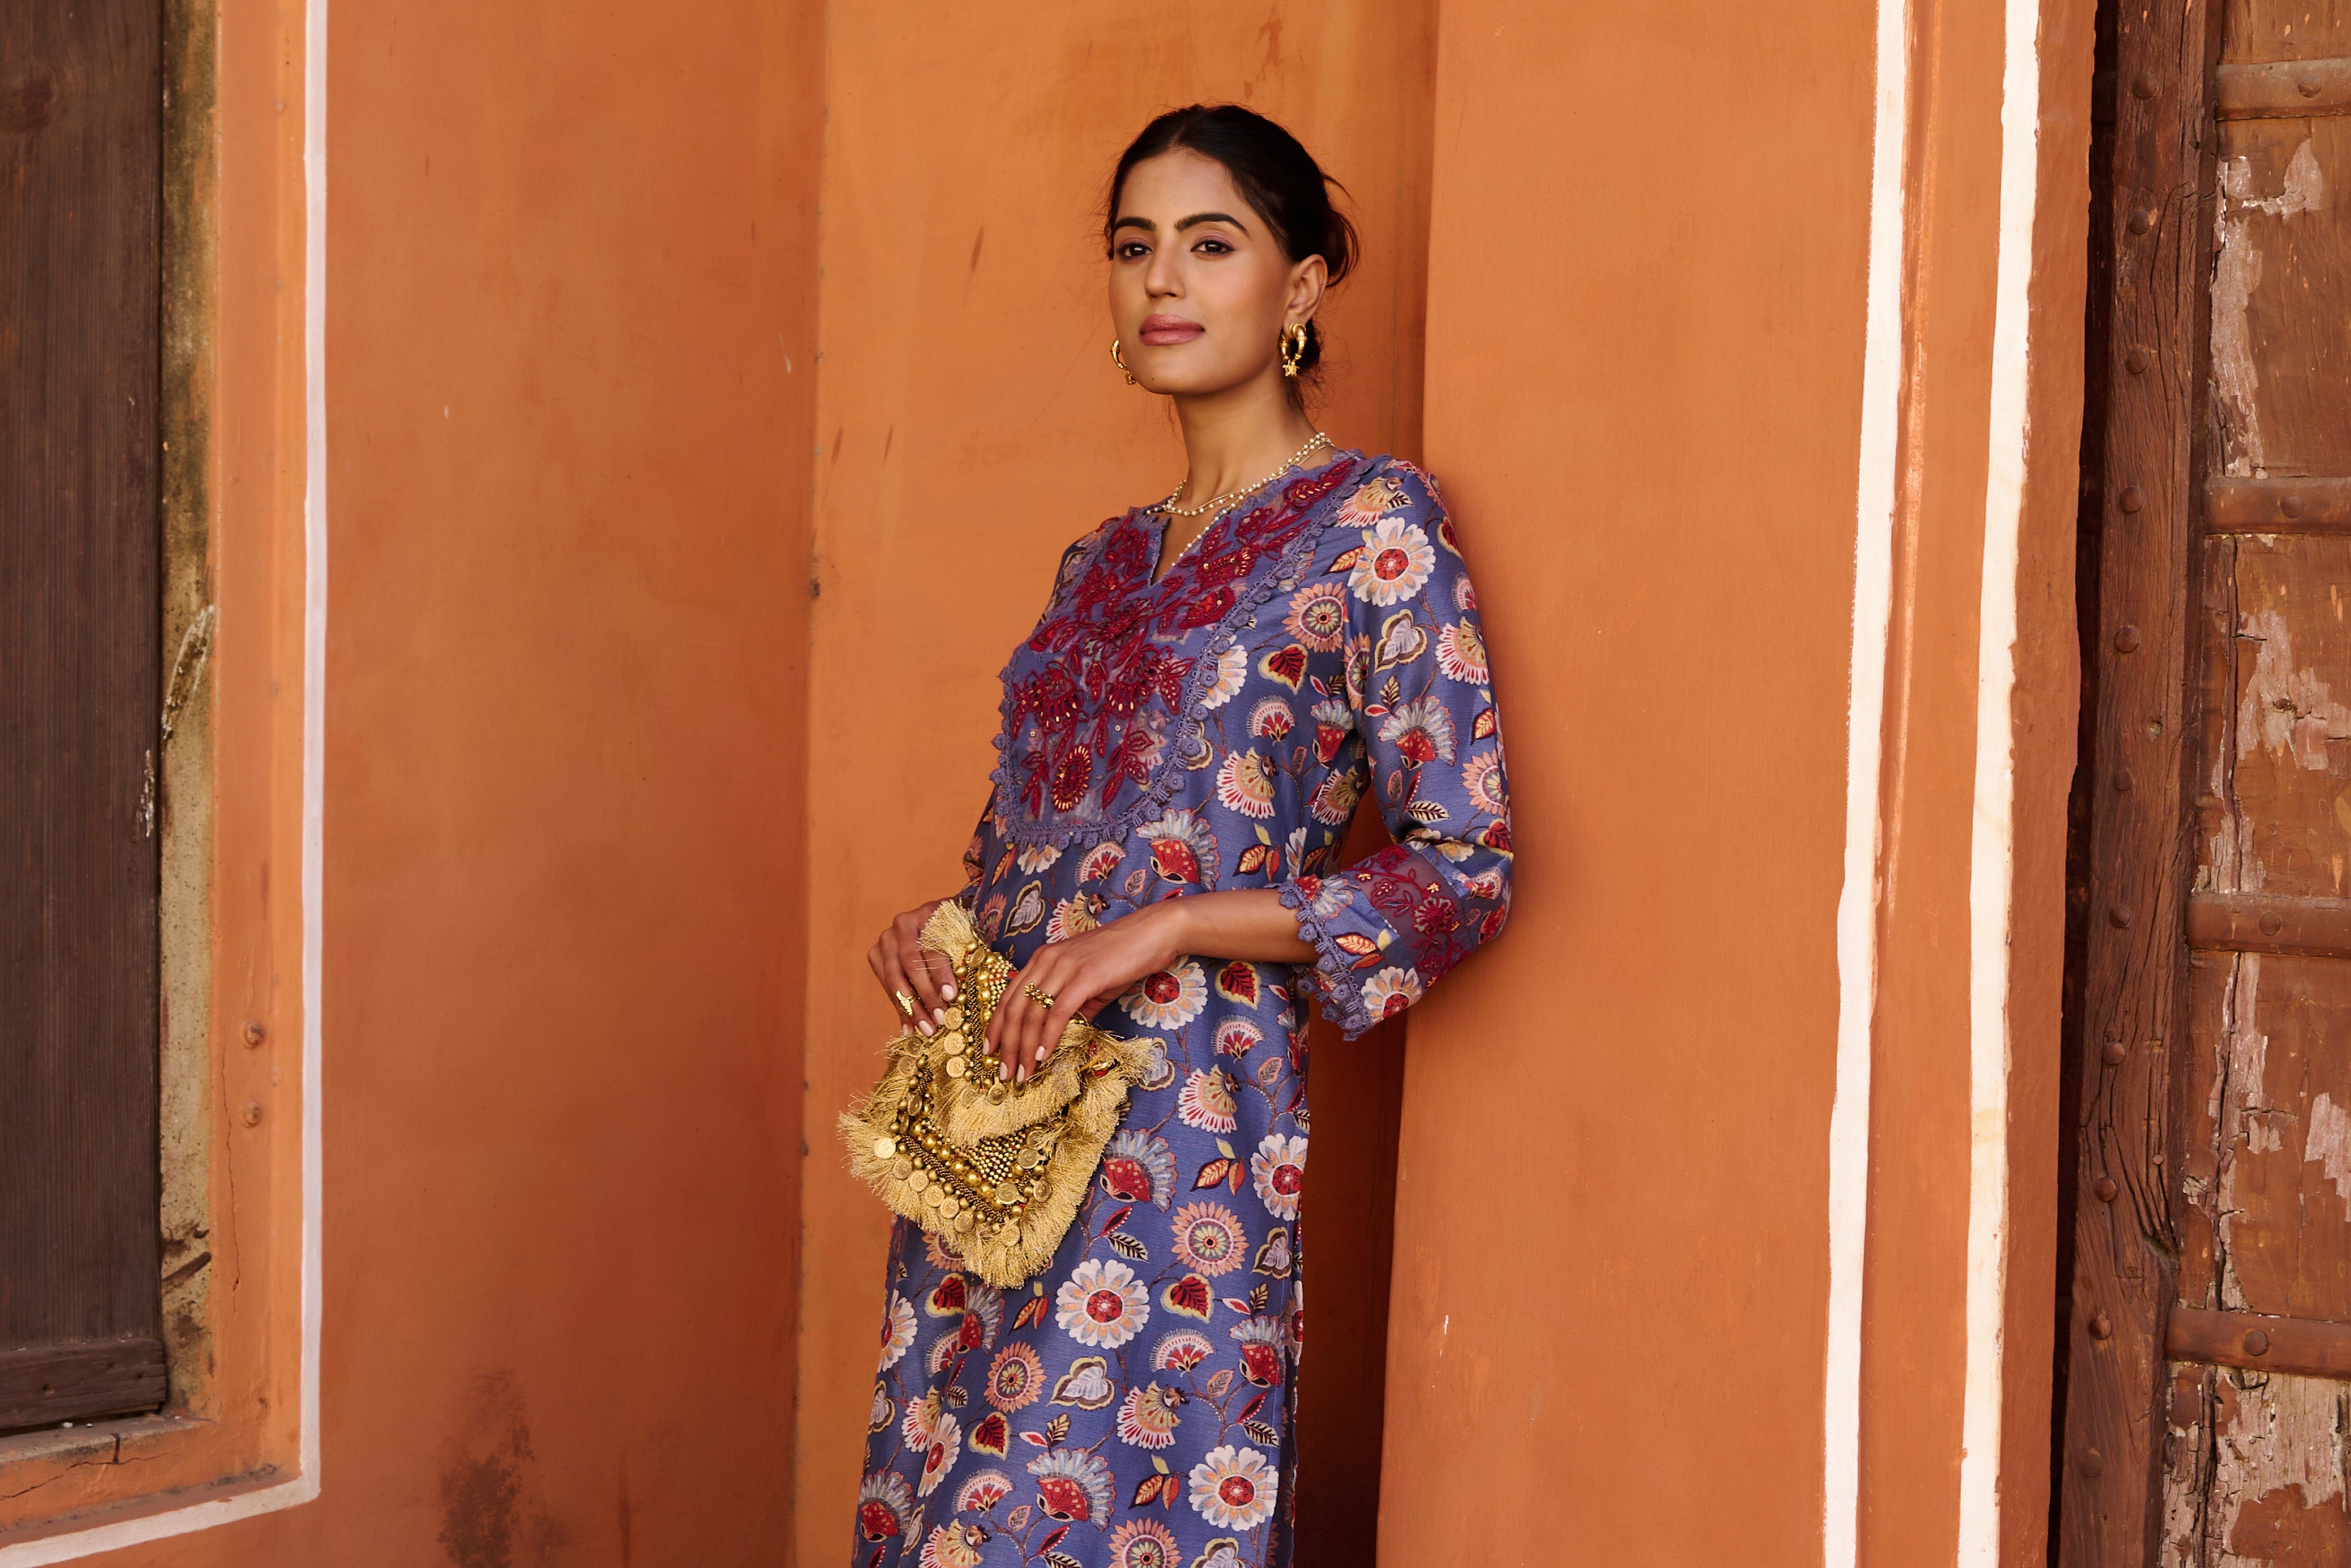 Beyond Occasions: Ethnic Wear as Everyday Fashion for Women